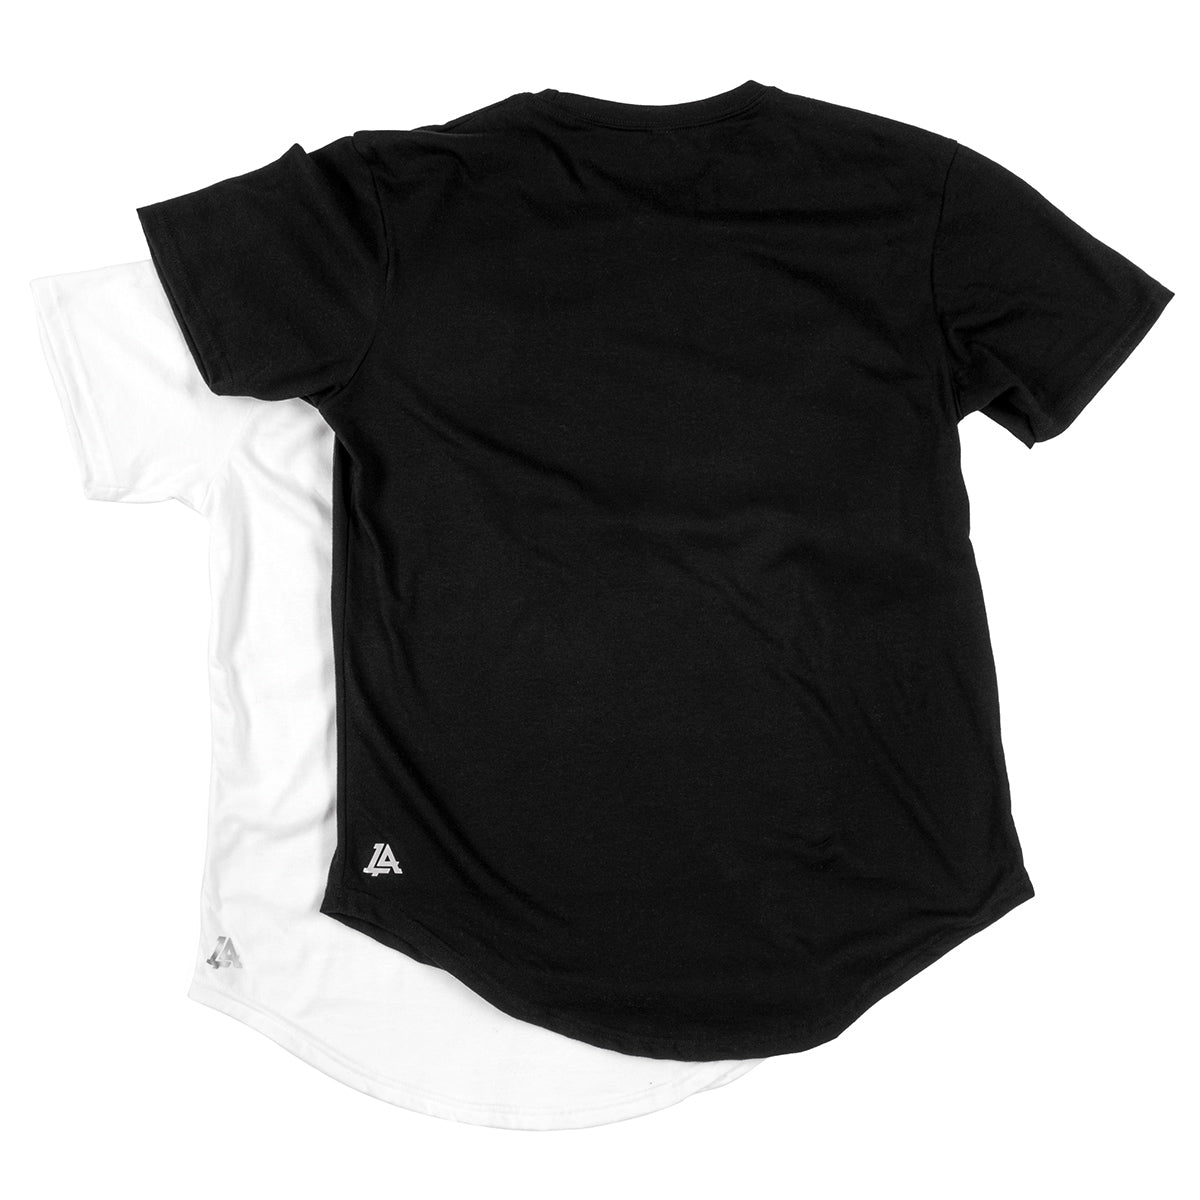 Lost Art Canada - black and white tagless basic tees back view